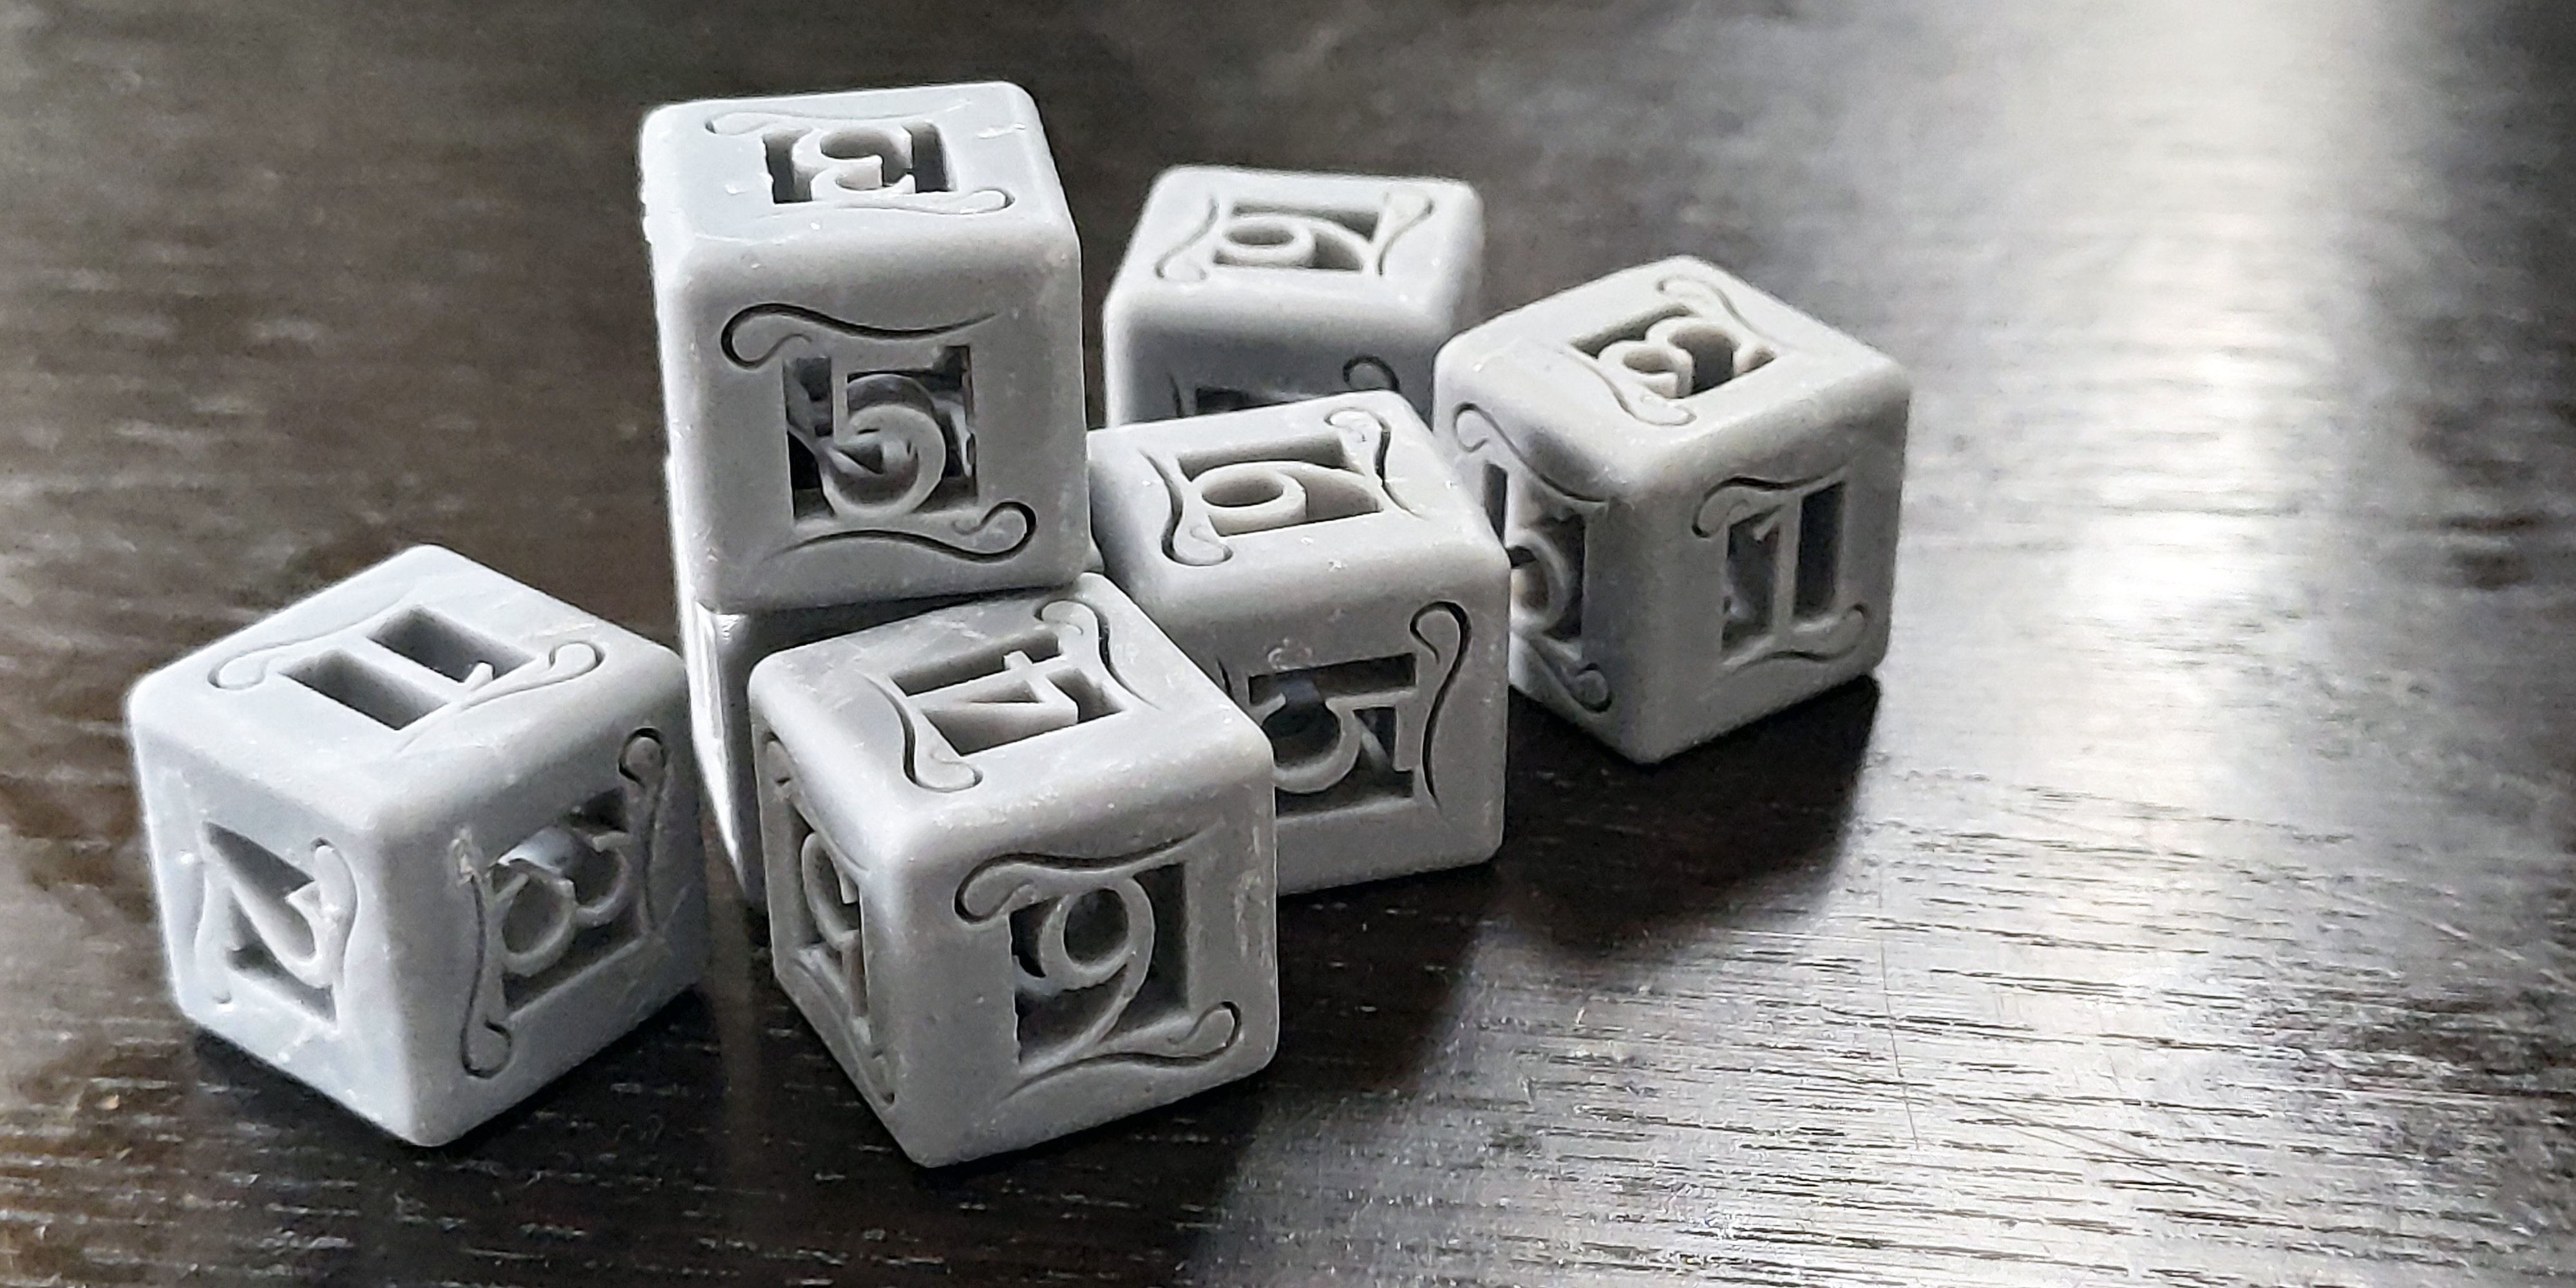 Find here a selection of the best 3D models of 3D printable files of dices and tower dice